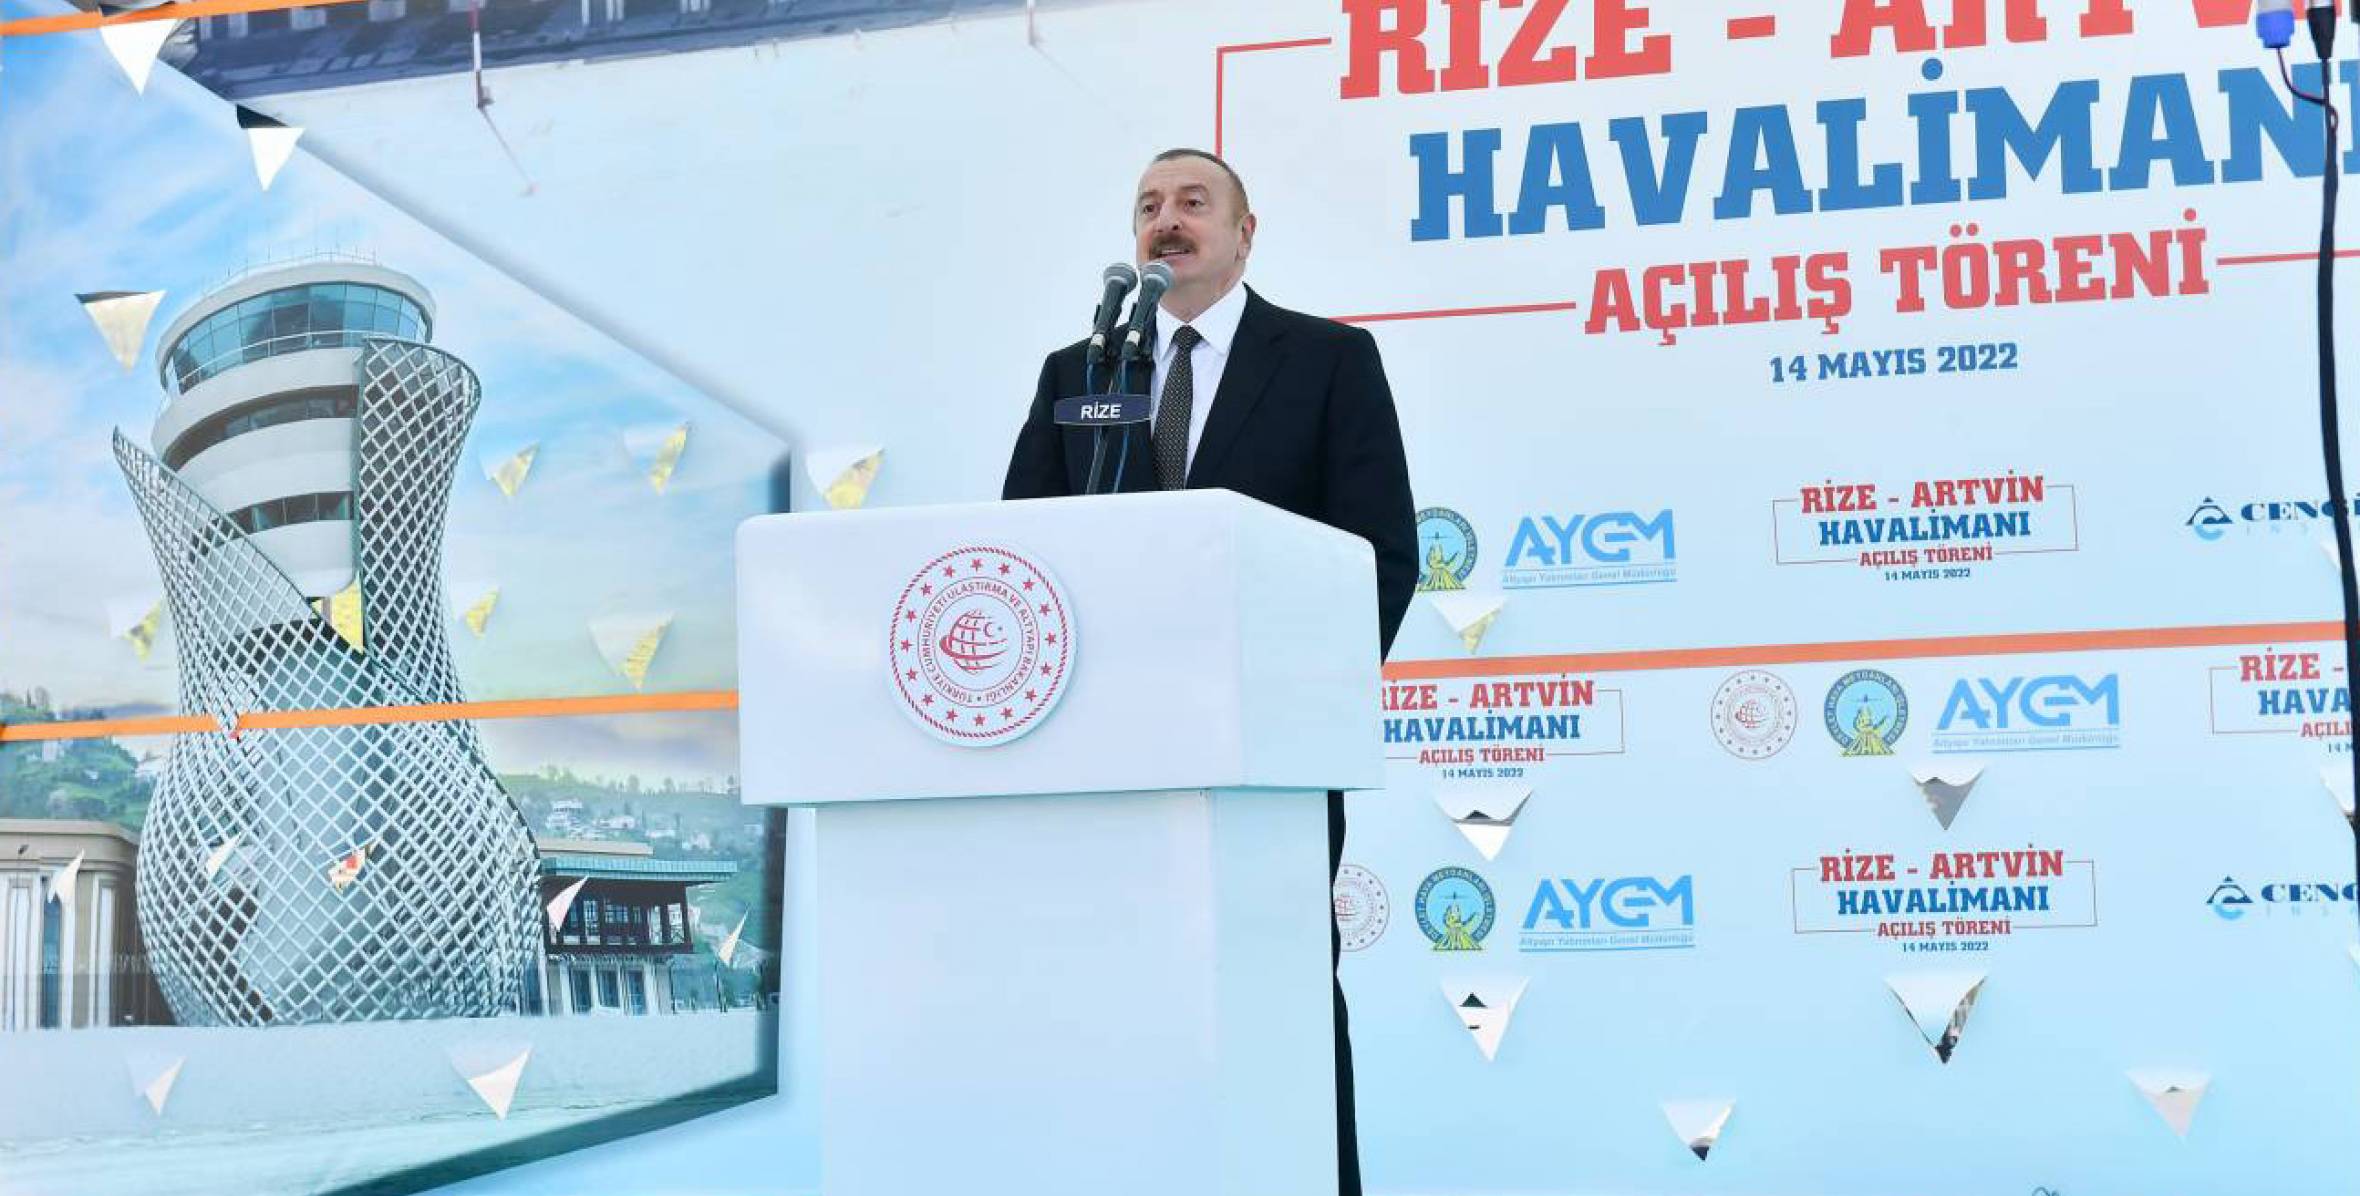 Speech by Ilham Aliyev at the opening ceremony of the Rize-Artvin Airport